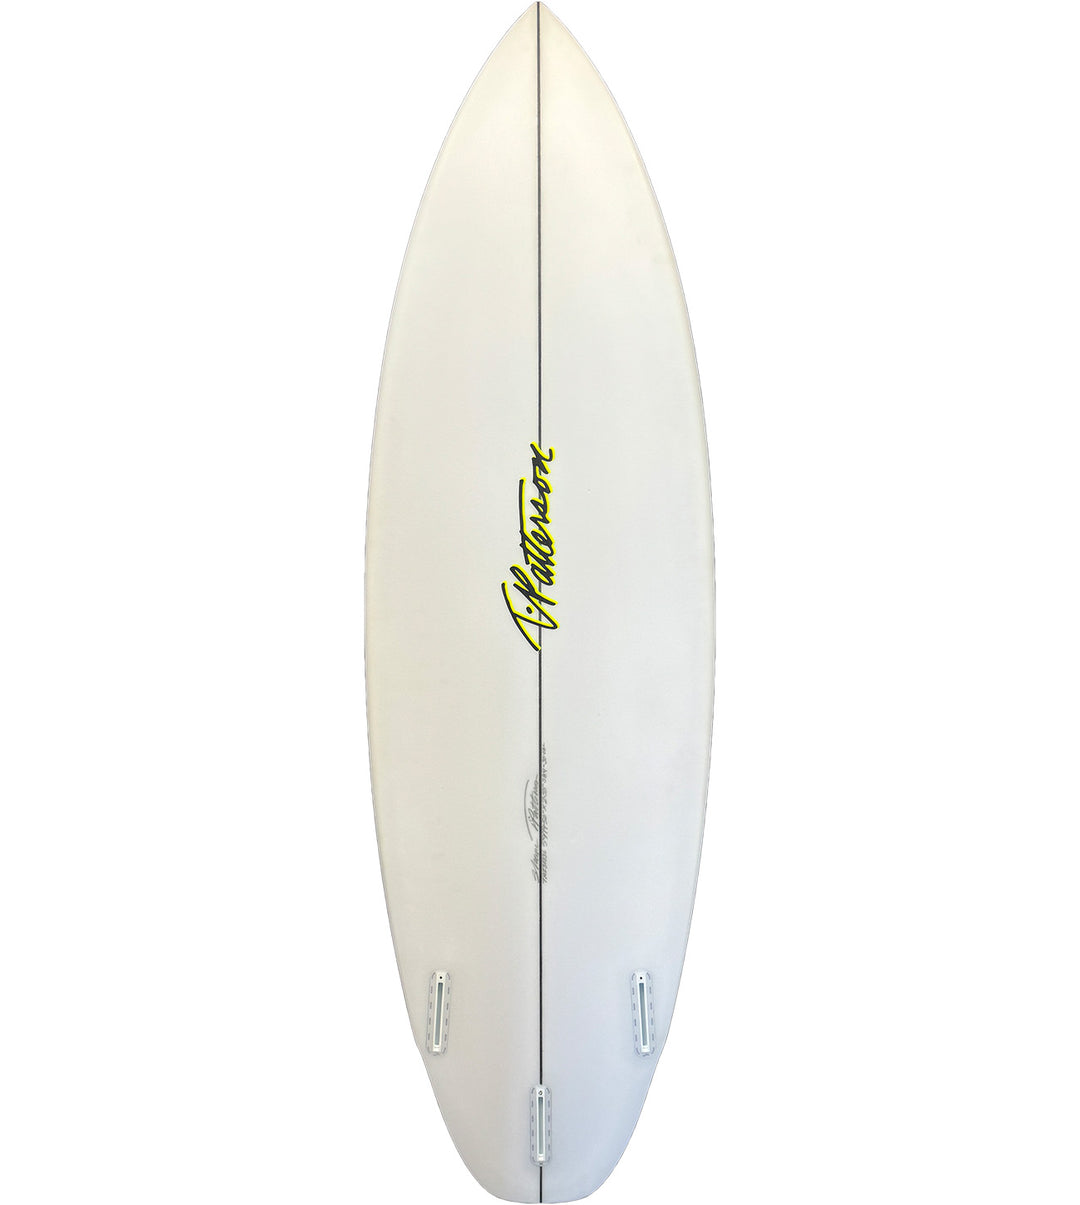 TPatterson Surfboard
Synthetic 84/Futures 5'9 #TPS231336